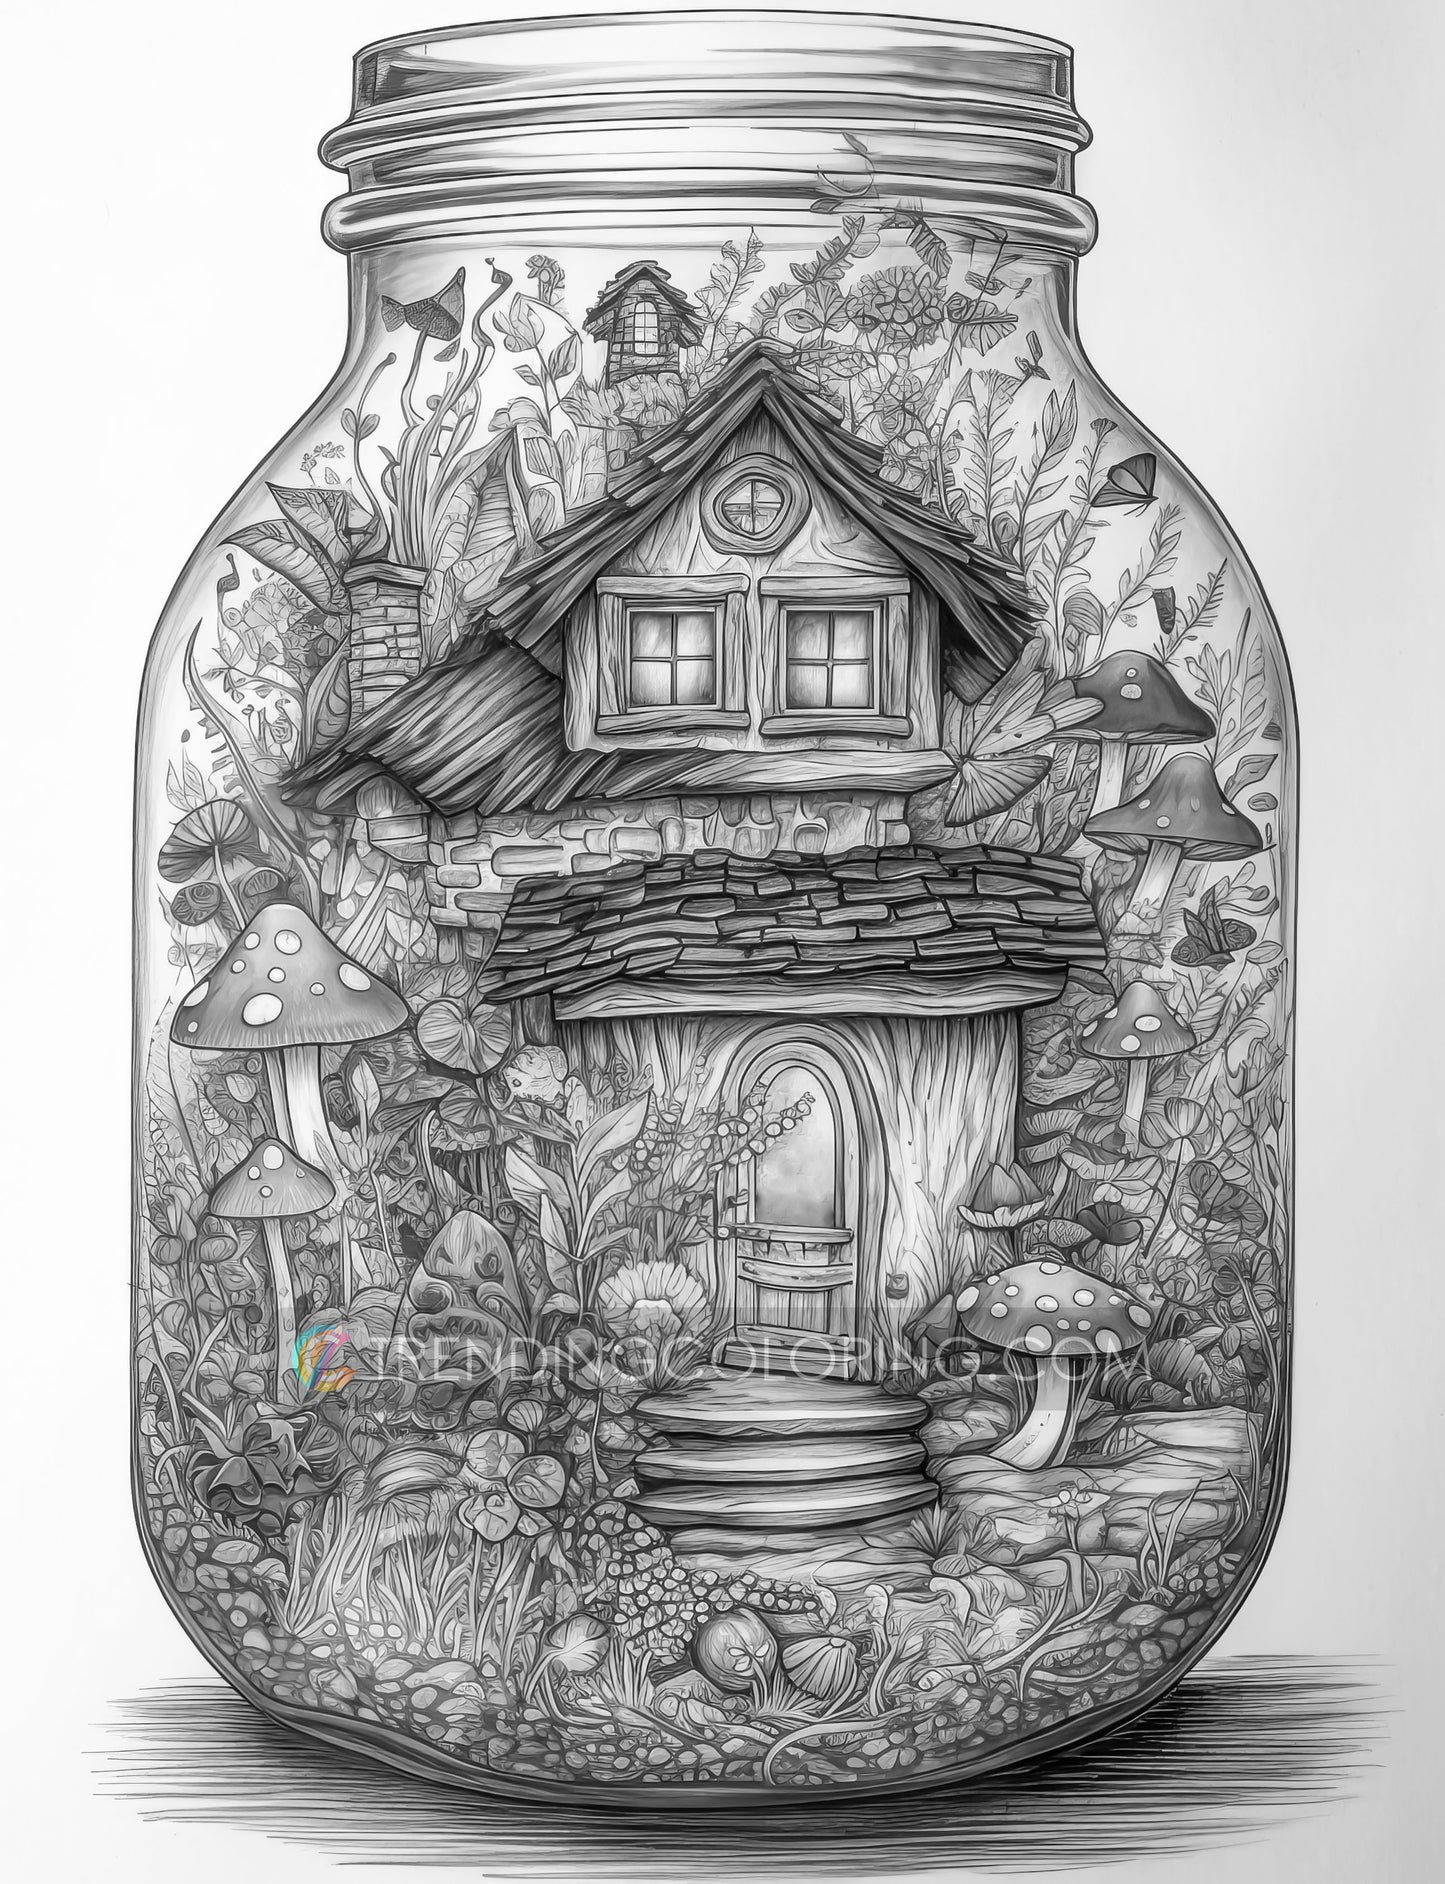 25 Fairy House In Jar Grayscale Coloring Pages - Instant Download - Printable Dark/Light